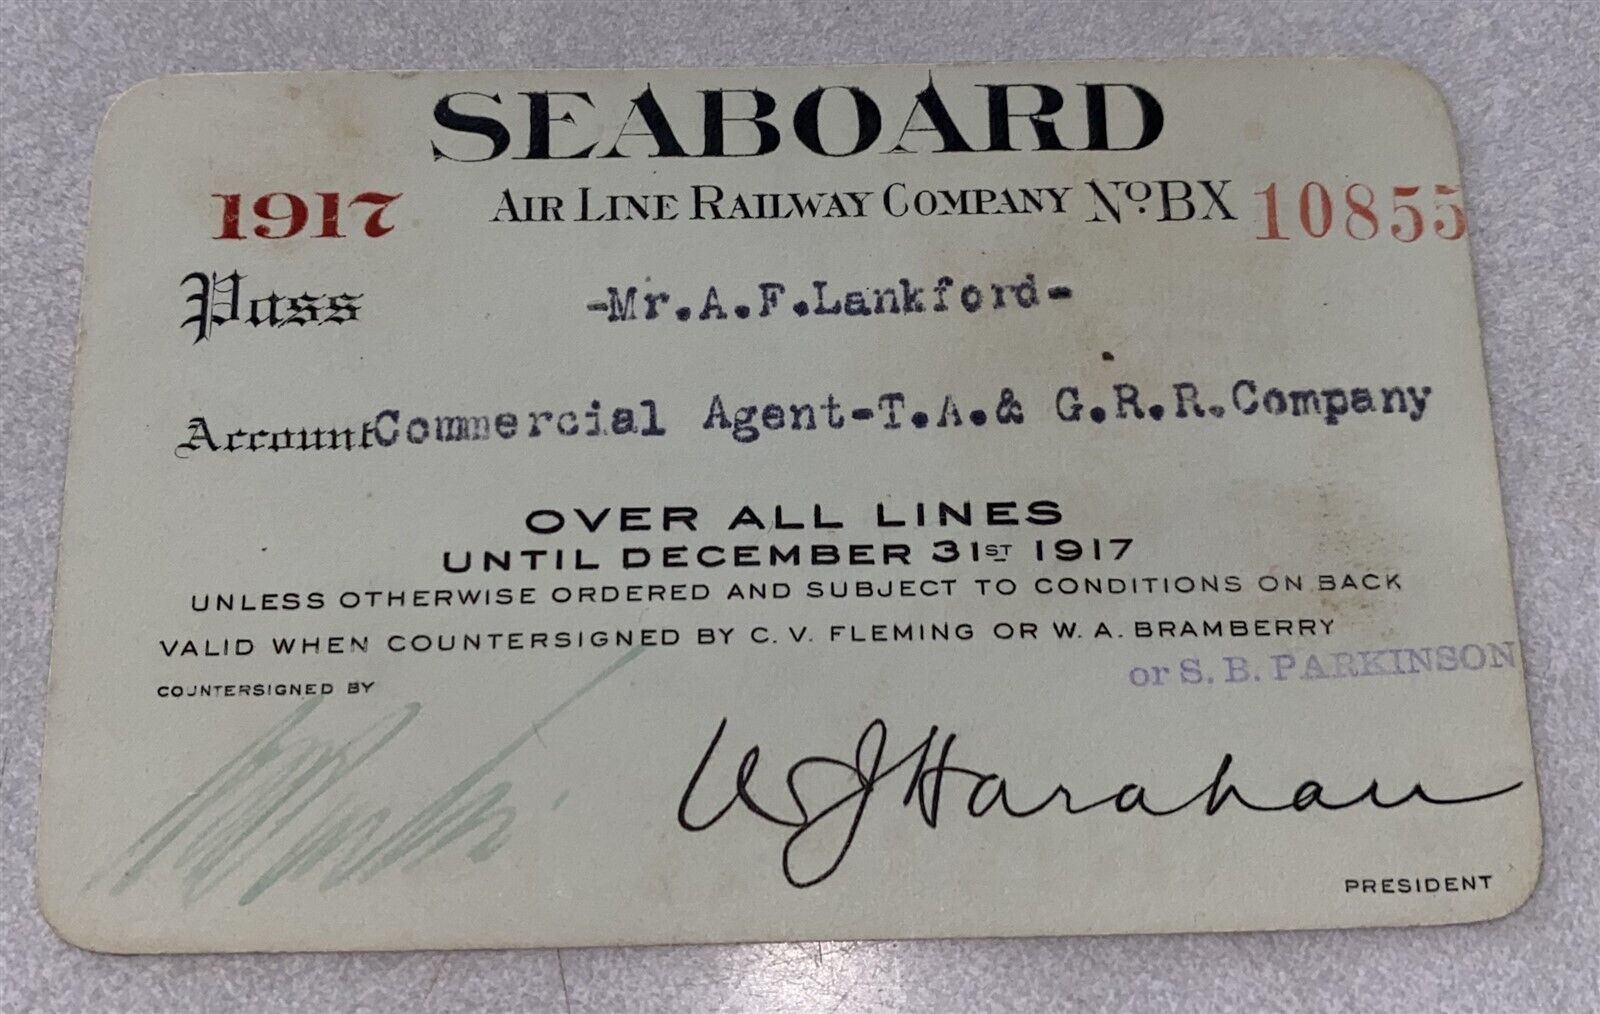 1917 Seaboard Airline Railway Co Railroad Pass Lankford Agent T.A & G.RR